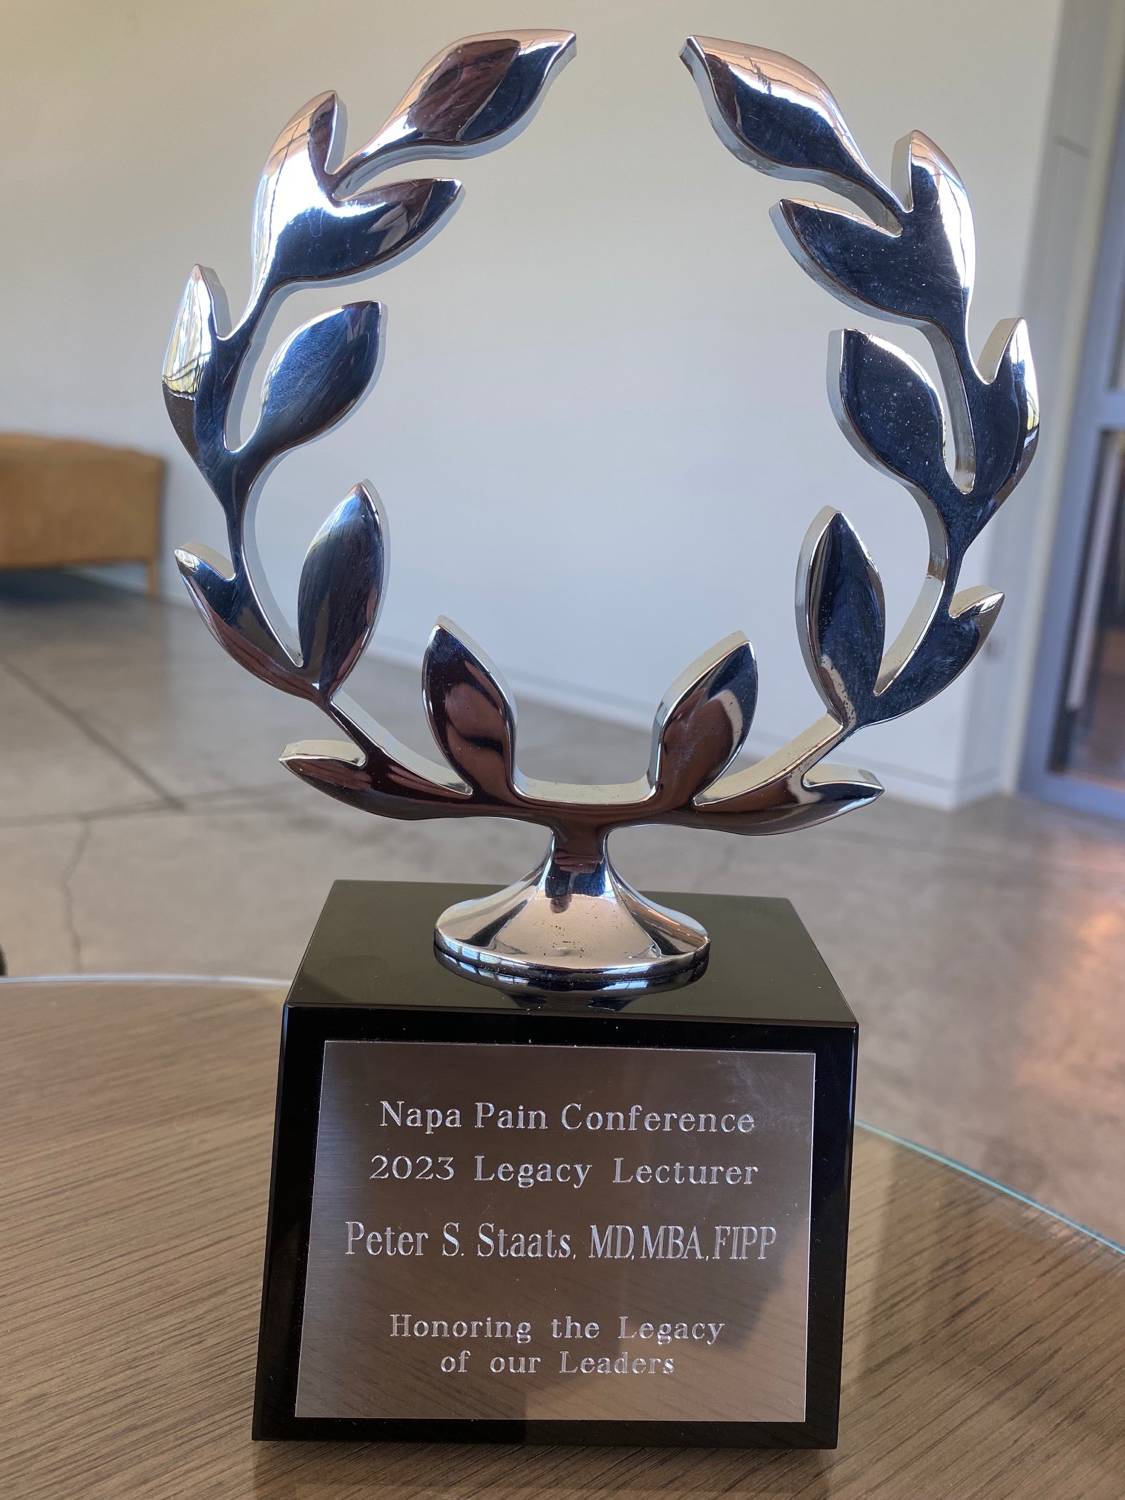 Napa Pain Conference Legacy Lecture and Award